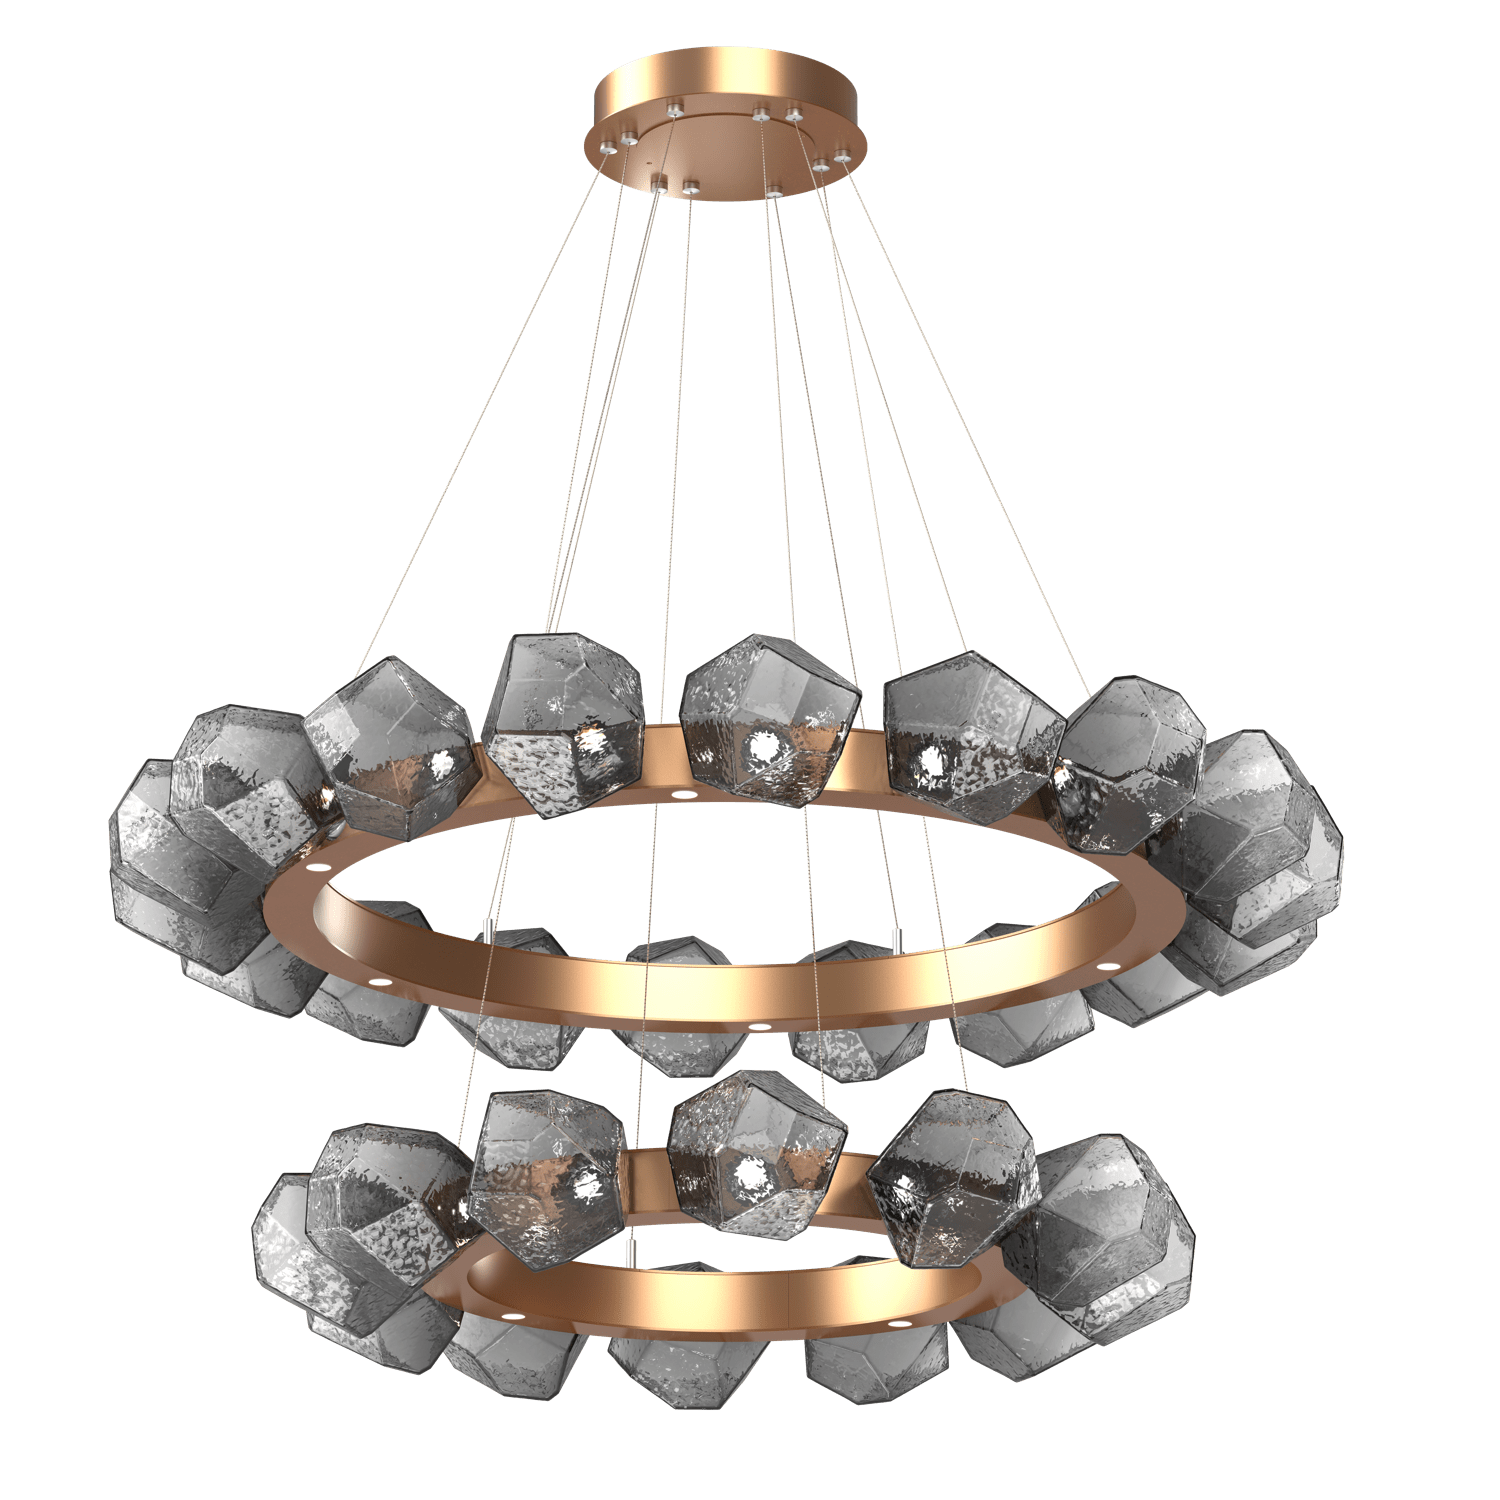 CHB0039-2T-NB-S-Hammerton-Studio-Gem-48-inch-two-tier-radial-ring-chandelier-with-novel-brass-finish-and-smoke-blown-glass-shades-and-LED-lamping